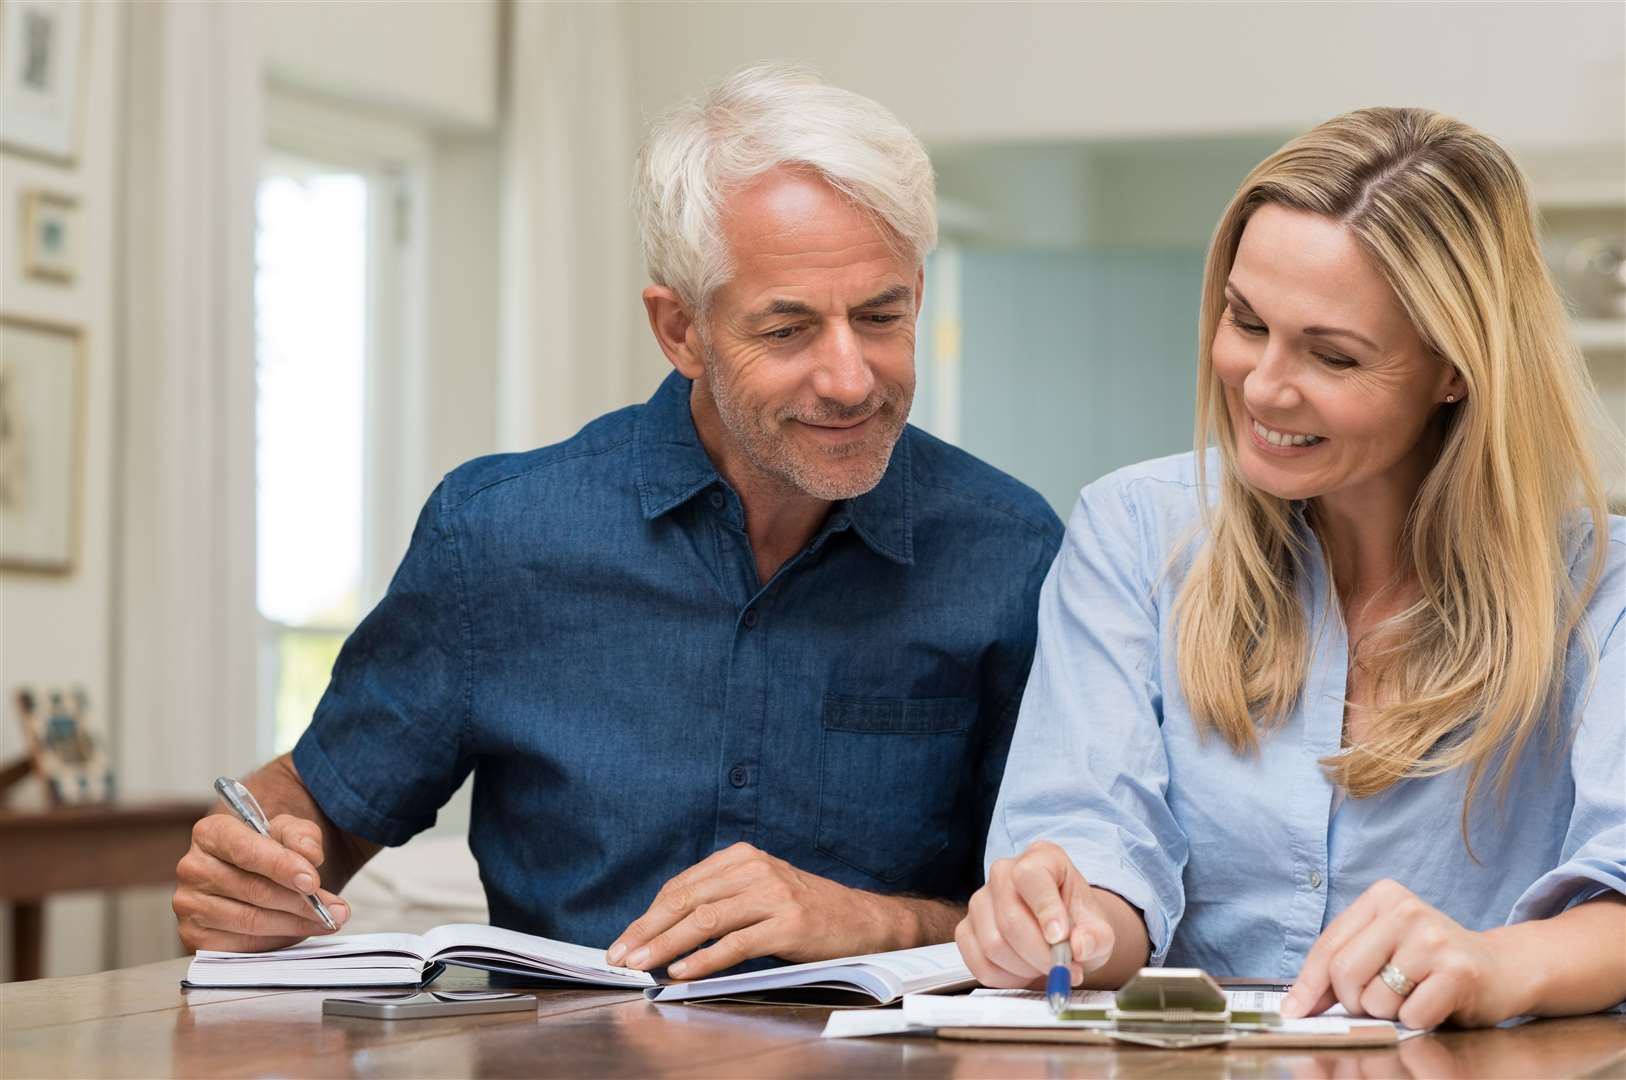 While buying back contributions can cost money it may add thousands to your eventual state pension. Image: iStock.